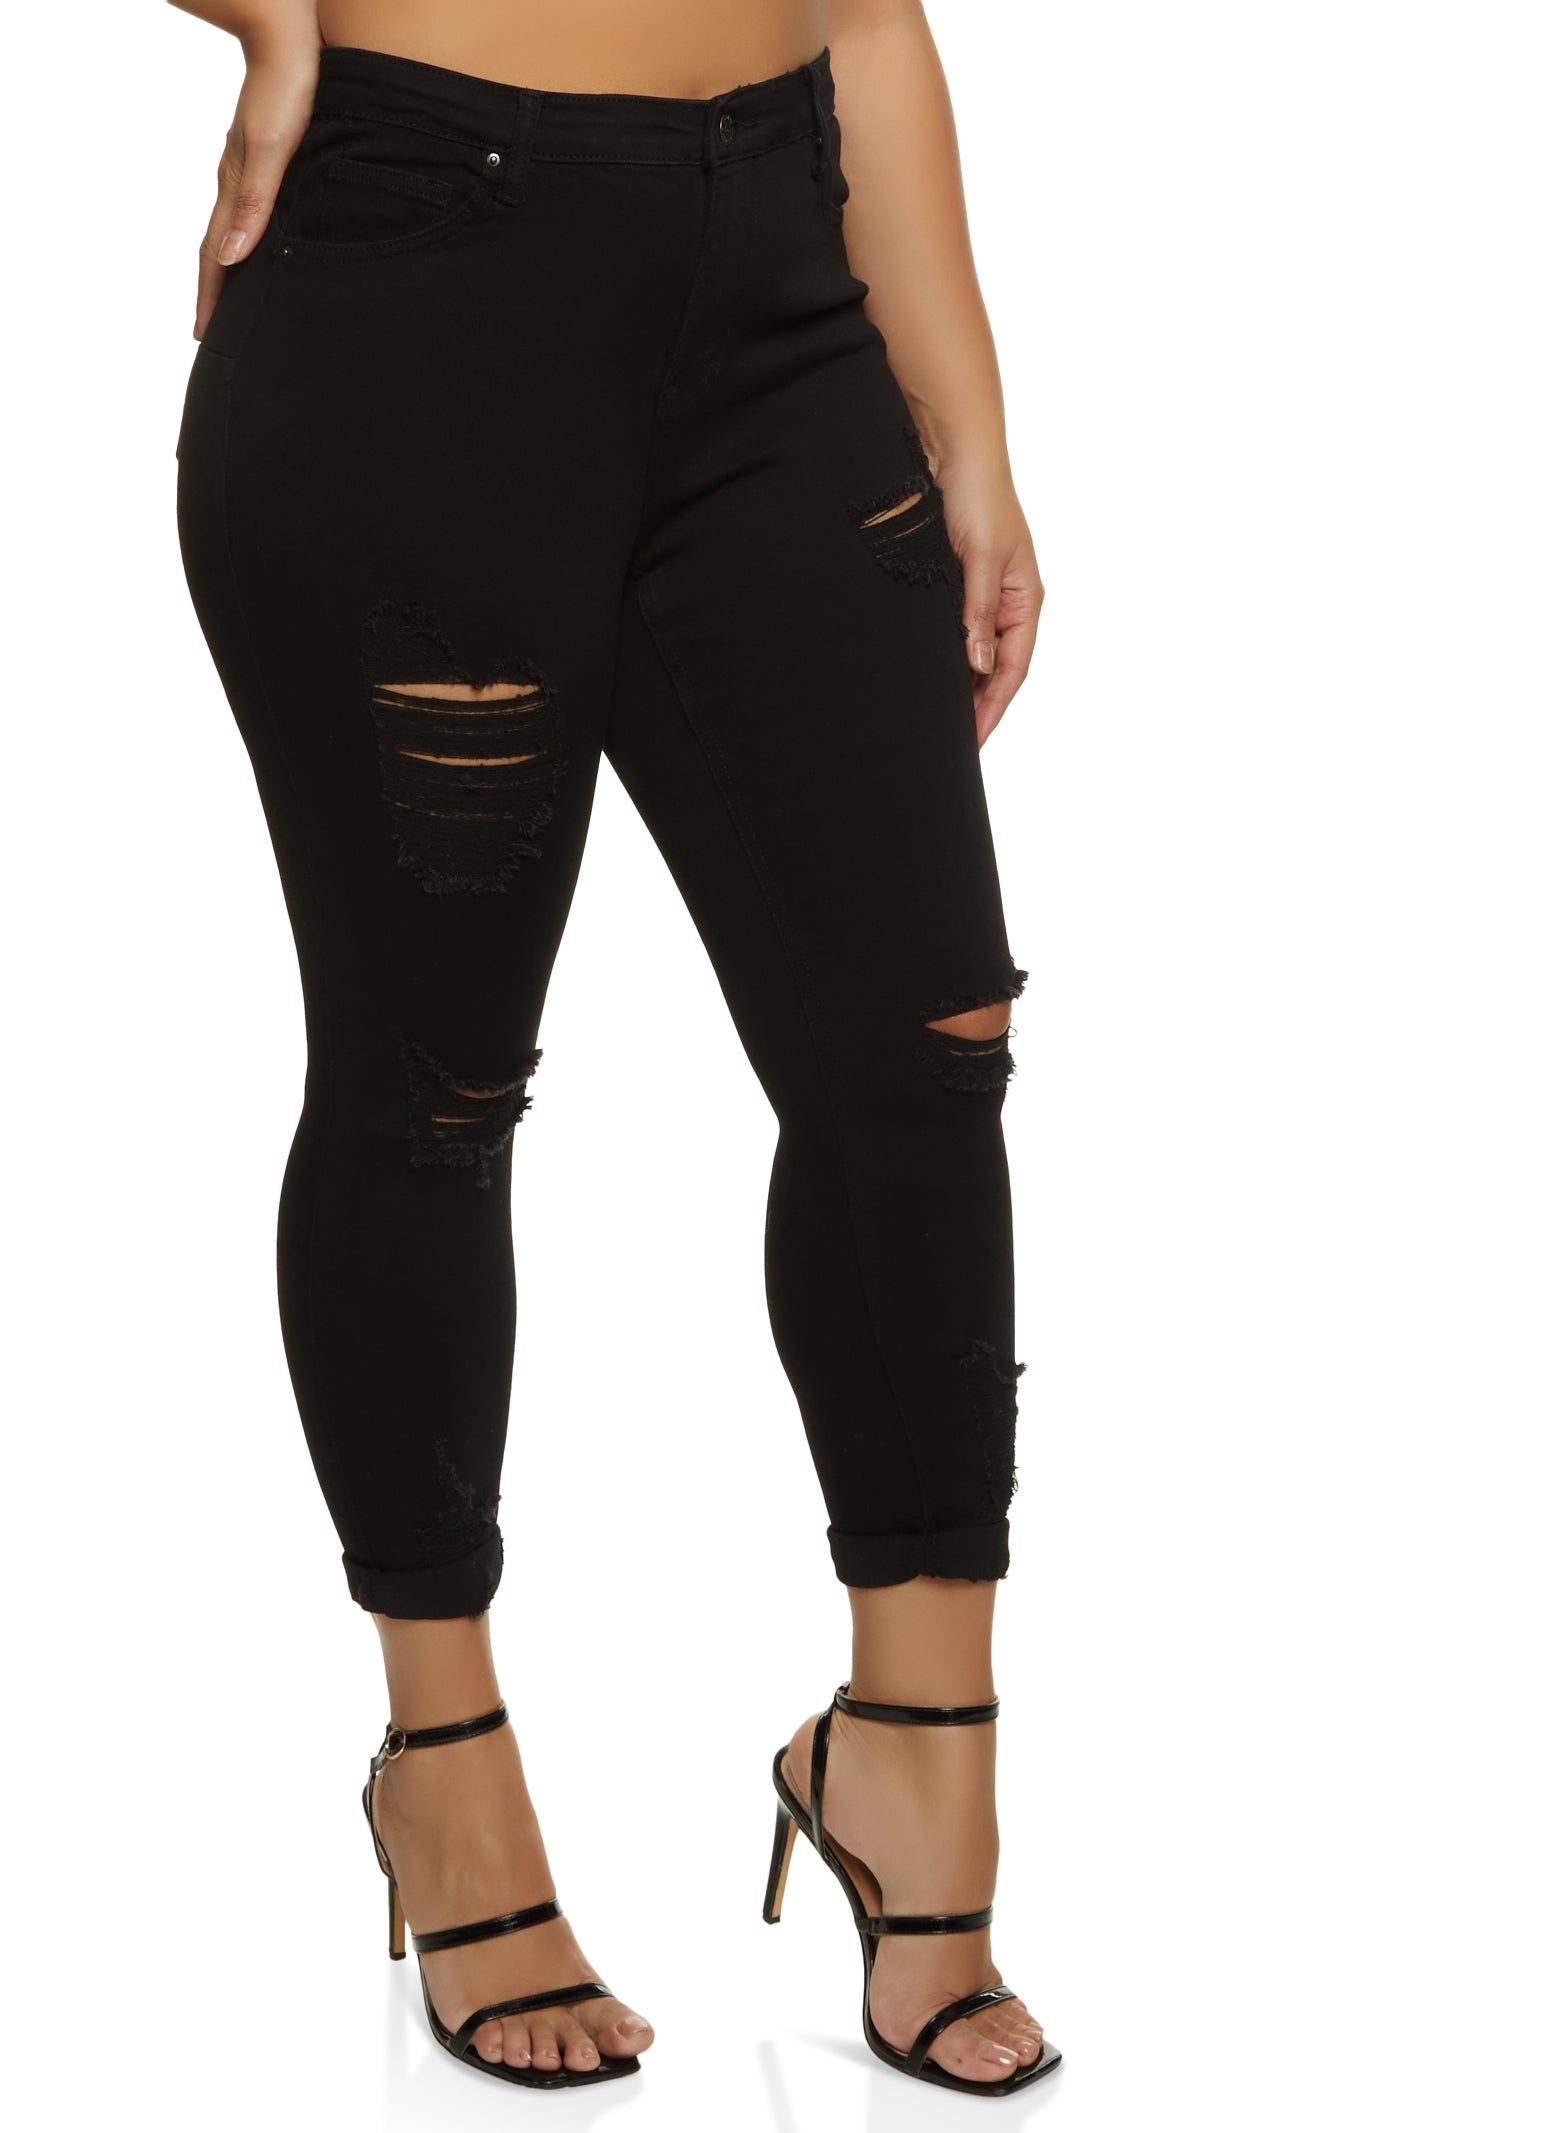 Plus Size Black Jeans for Women, Everyday Low Prices